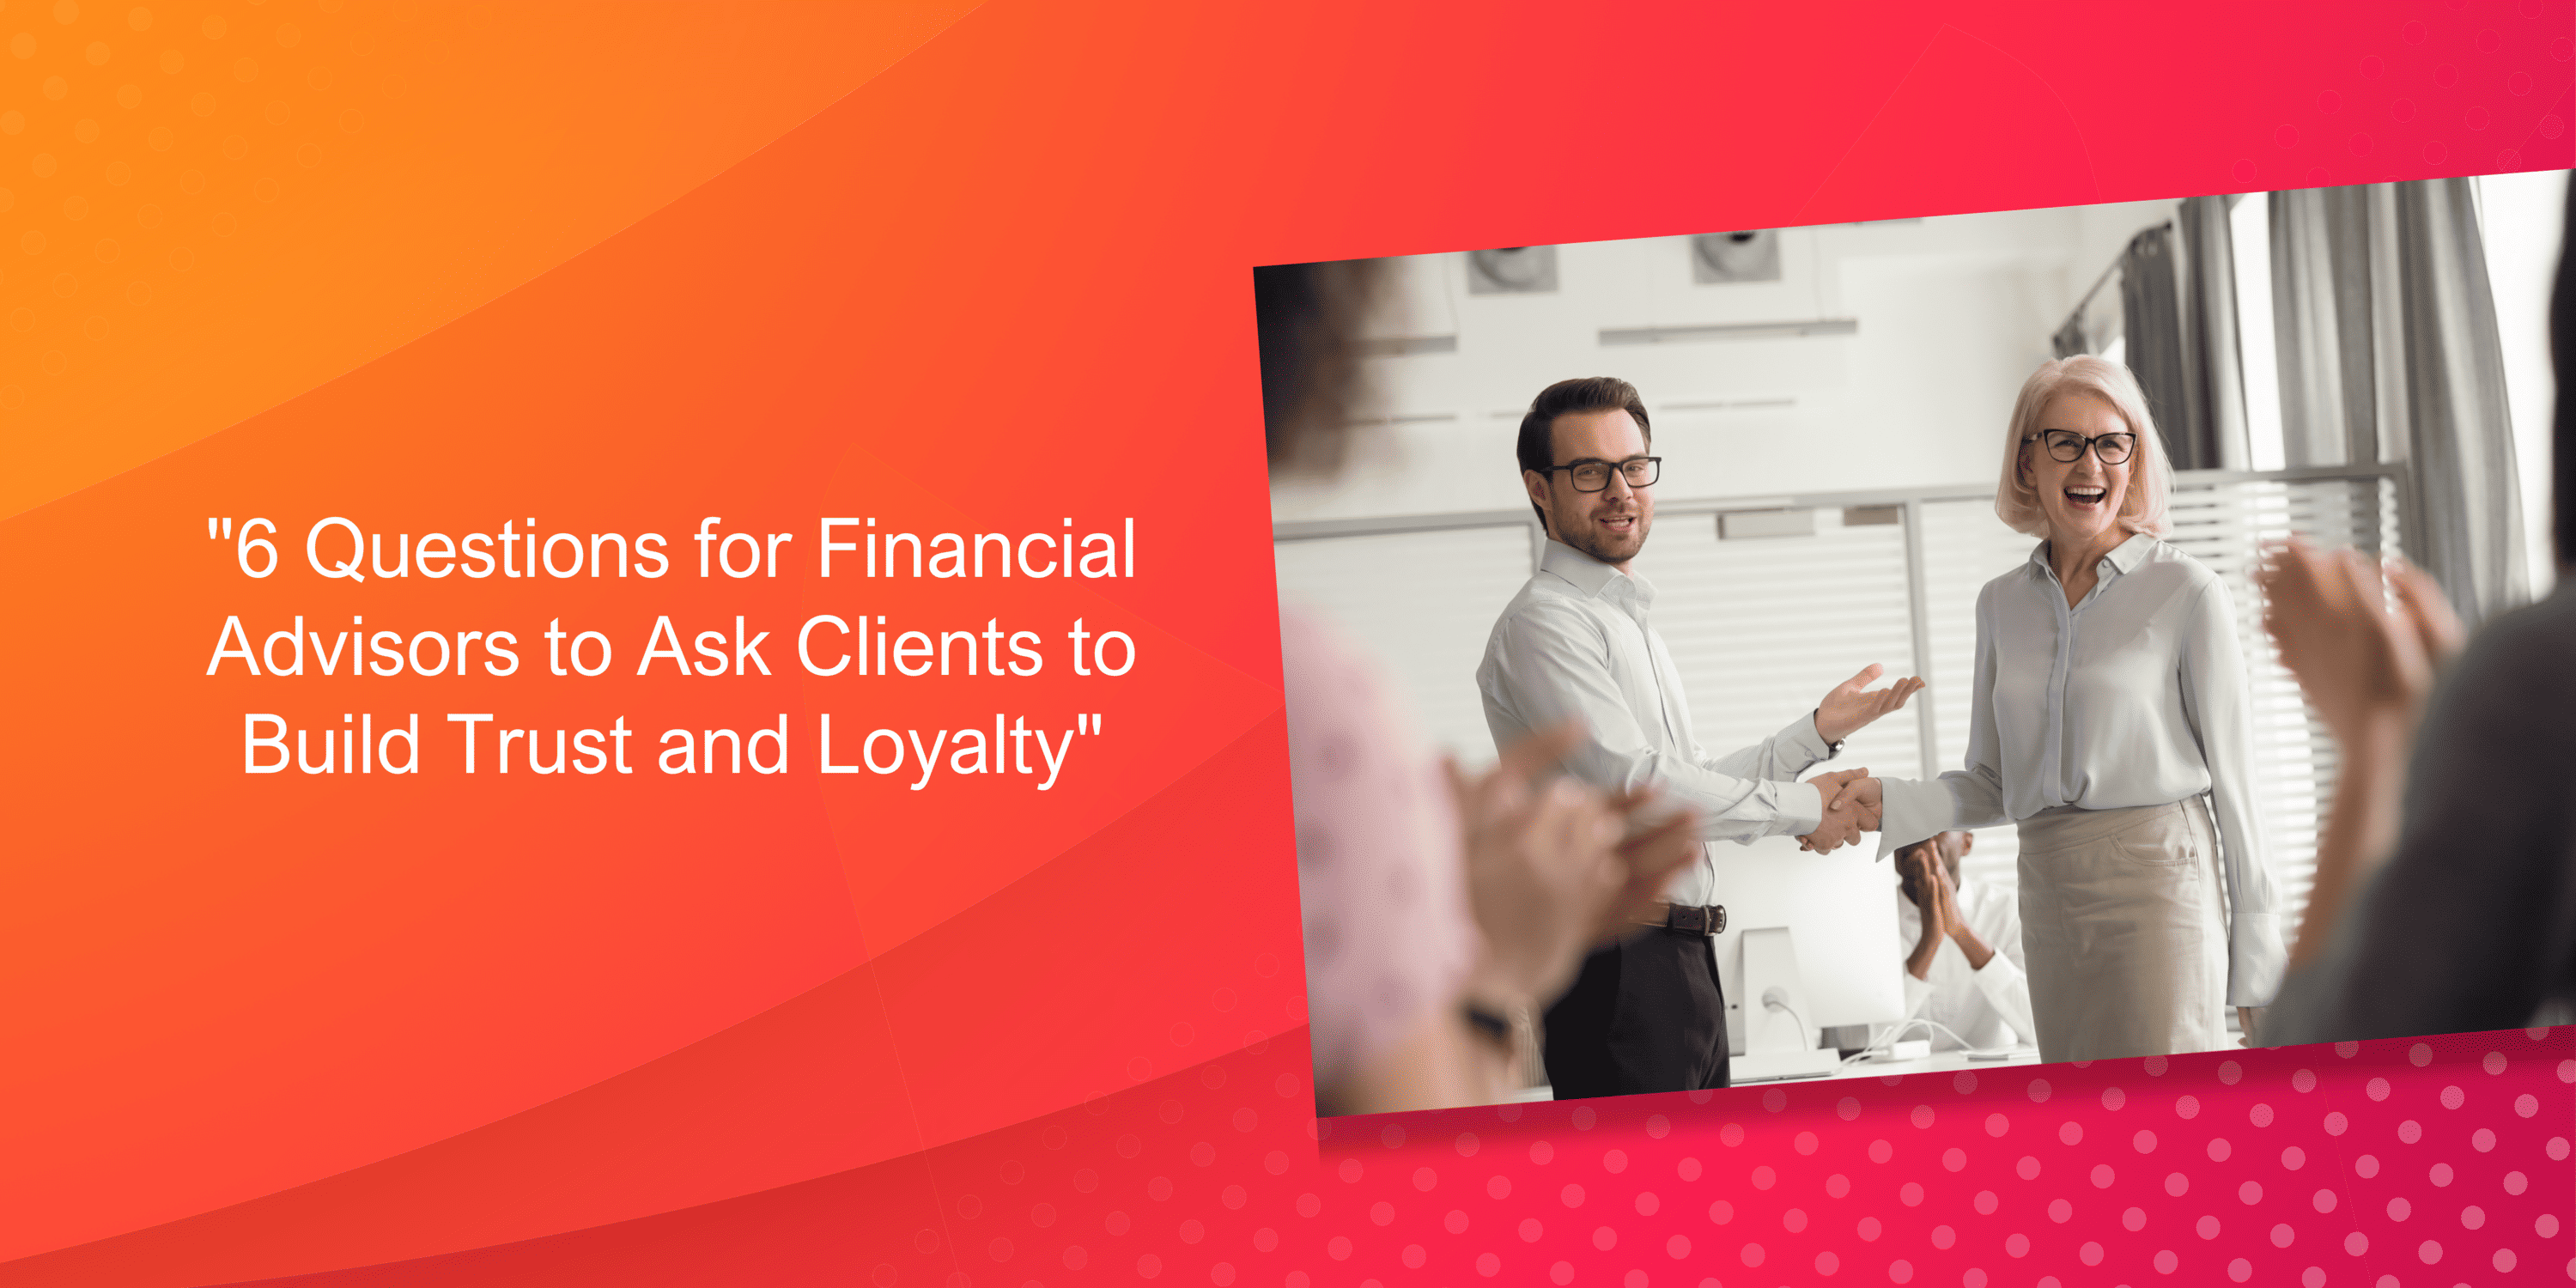 6 Questions for Financial Advisors to Ask Clients to Build Trust and Loyalty